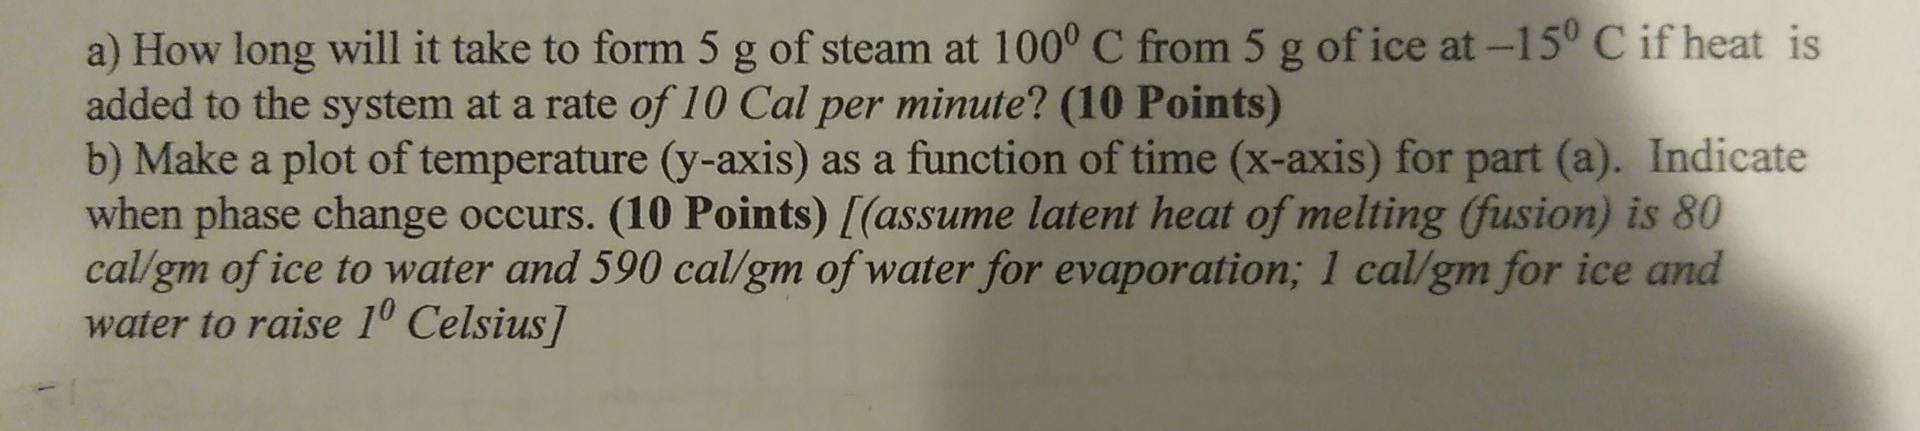 a) How long will it take to form 5 g of steam at 100° C from 5 g of ice at -15° C if heat is added to the system at a rate of